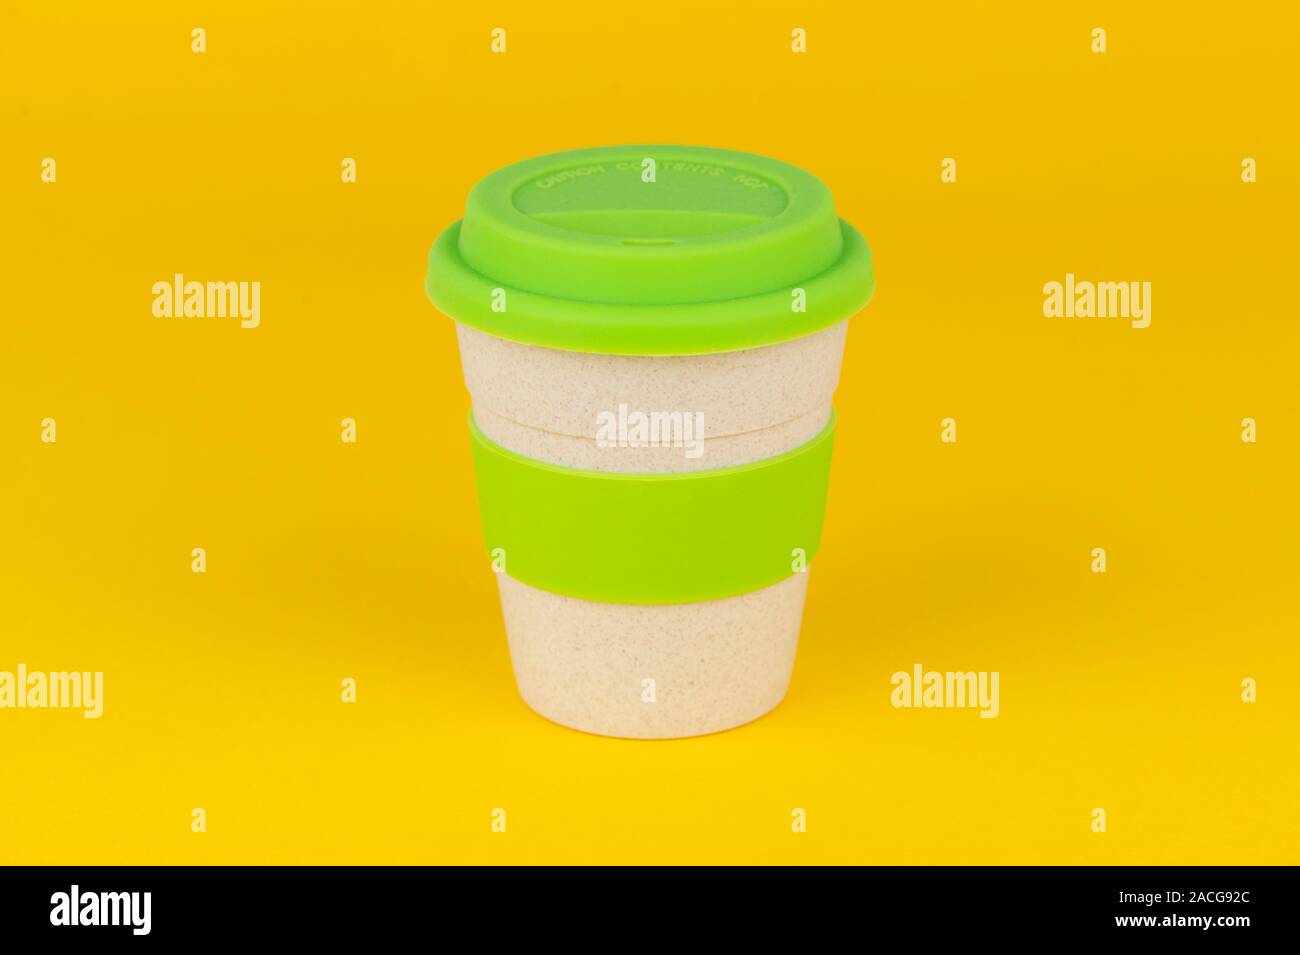 A reusable coffee cup shot on a yellow background. Stock Photo